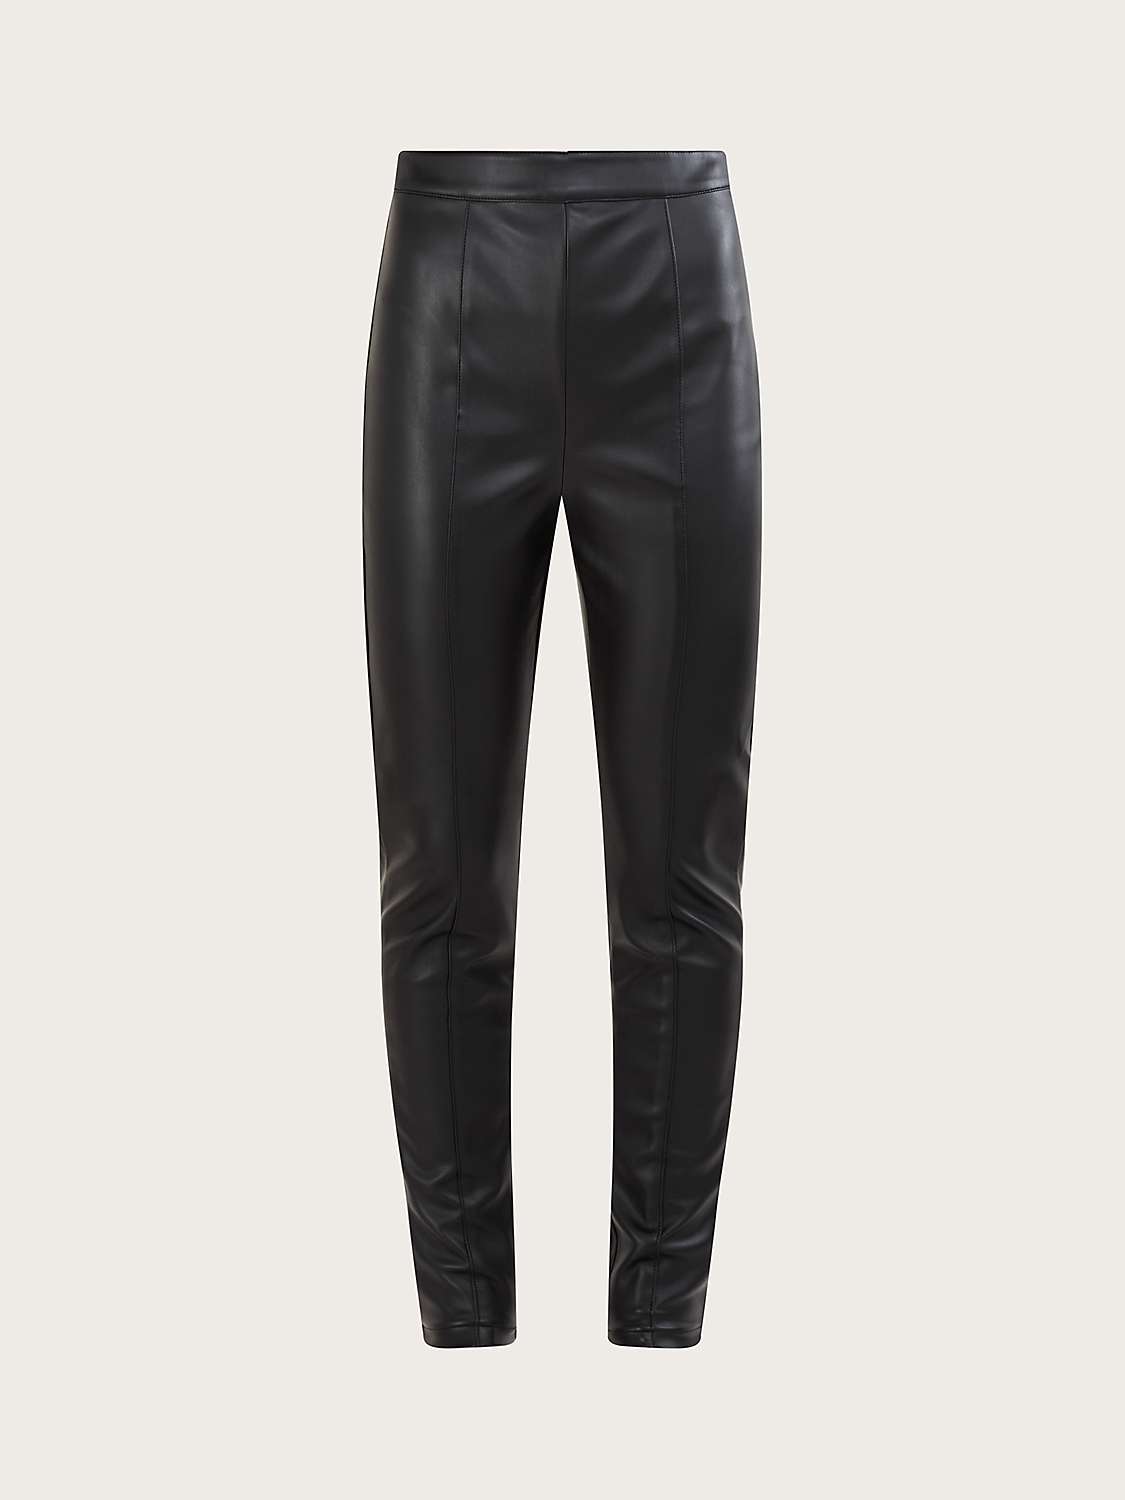 Monsoon Lillian Faux Leather Trousers at John Lewis & Partners